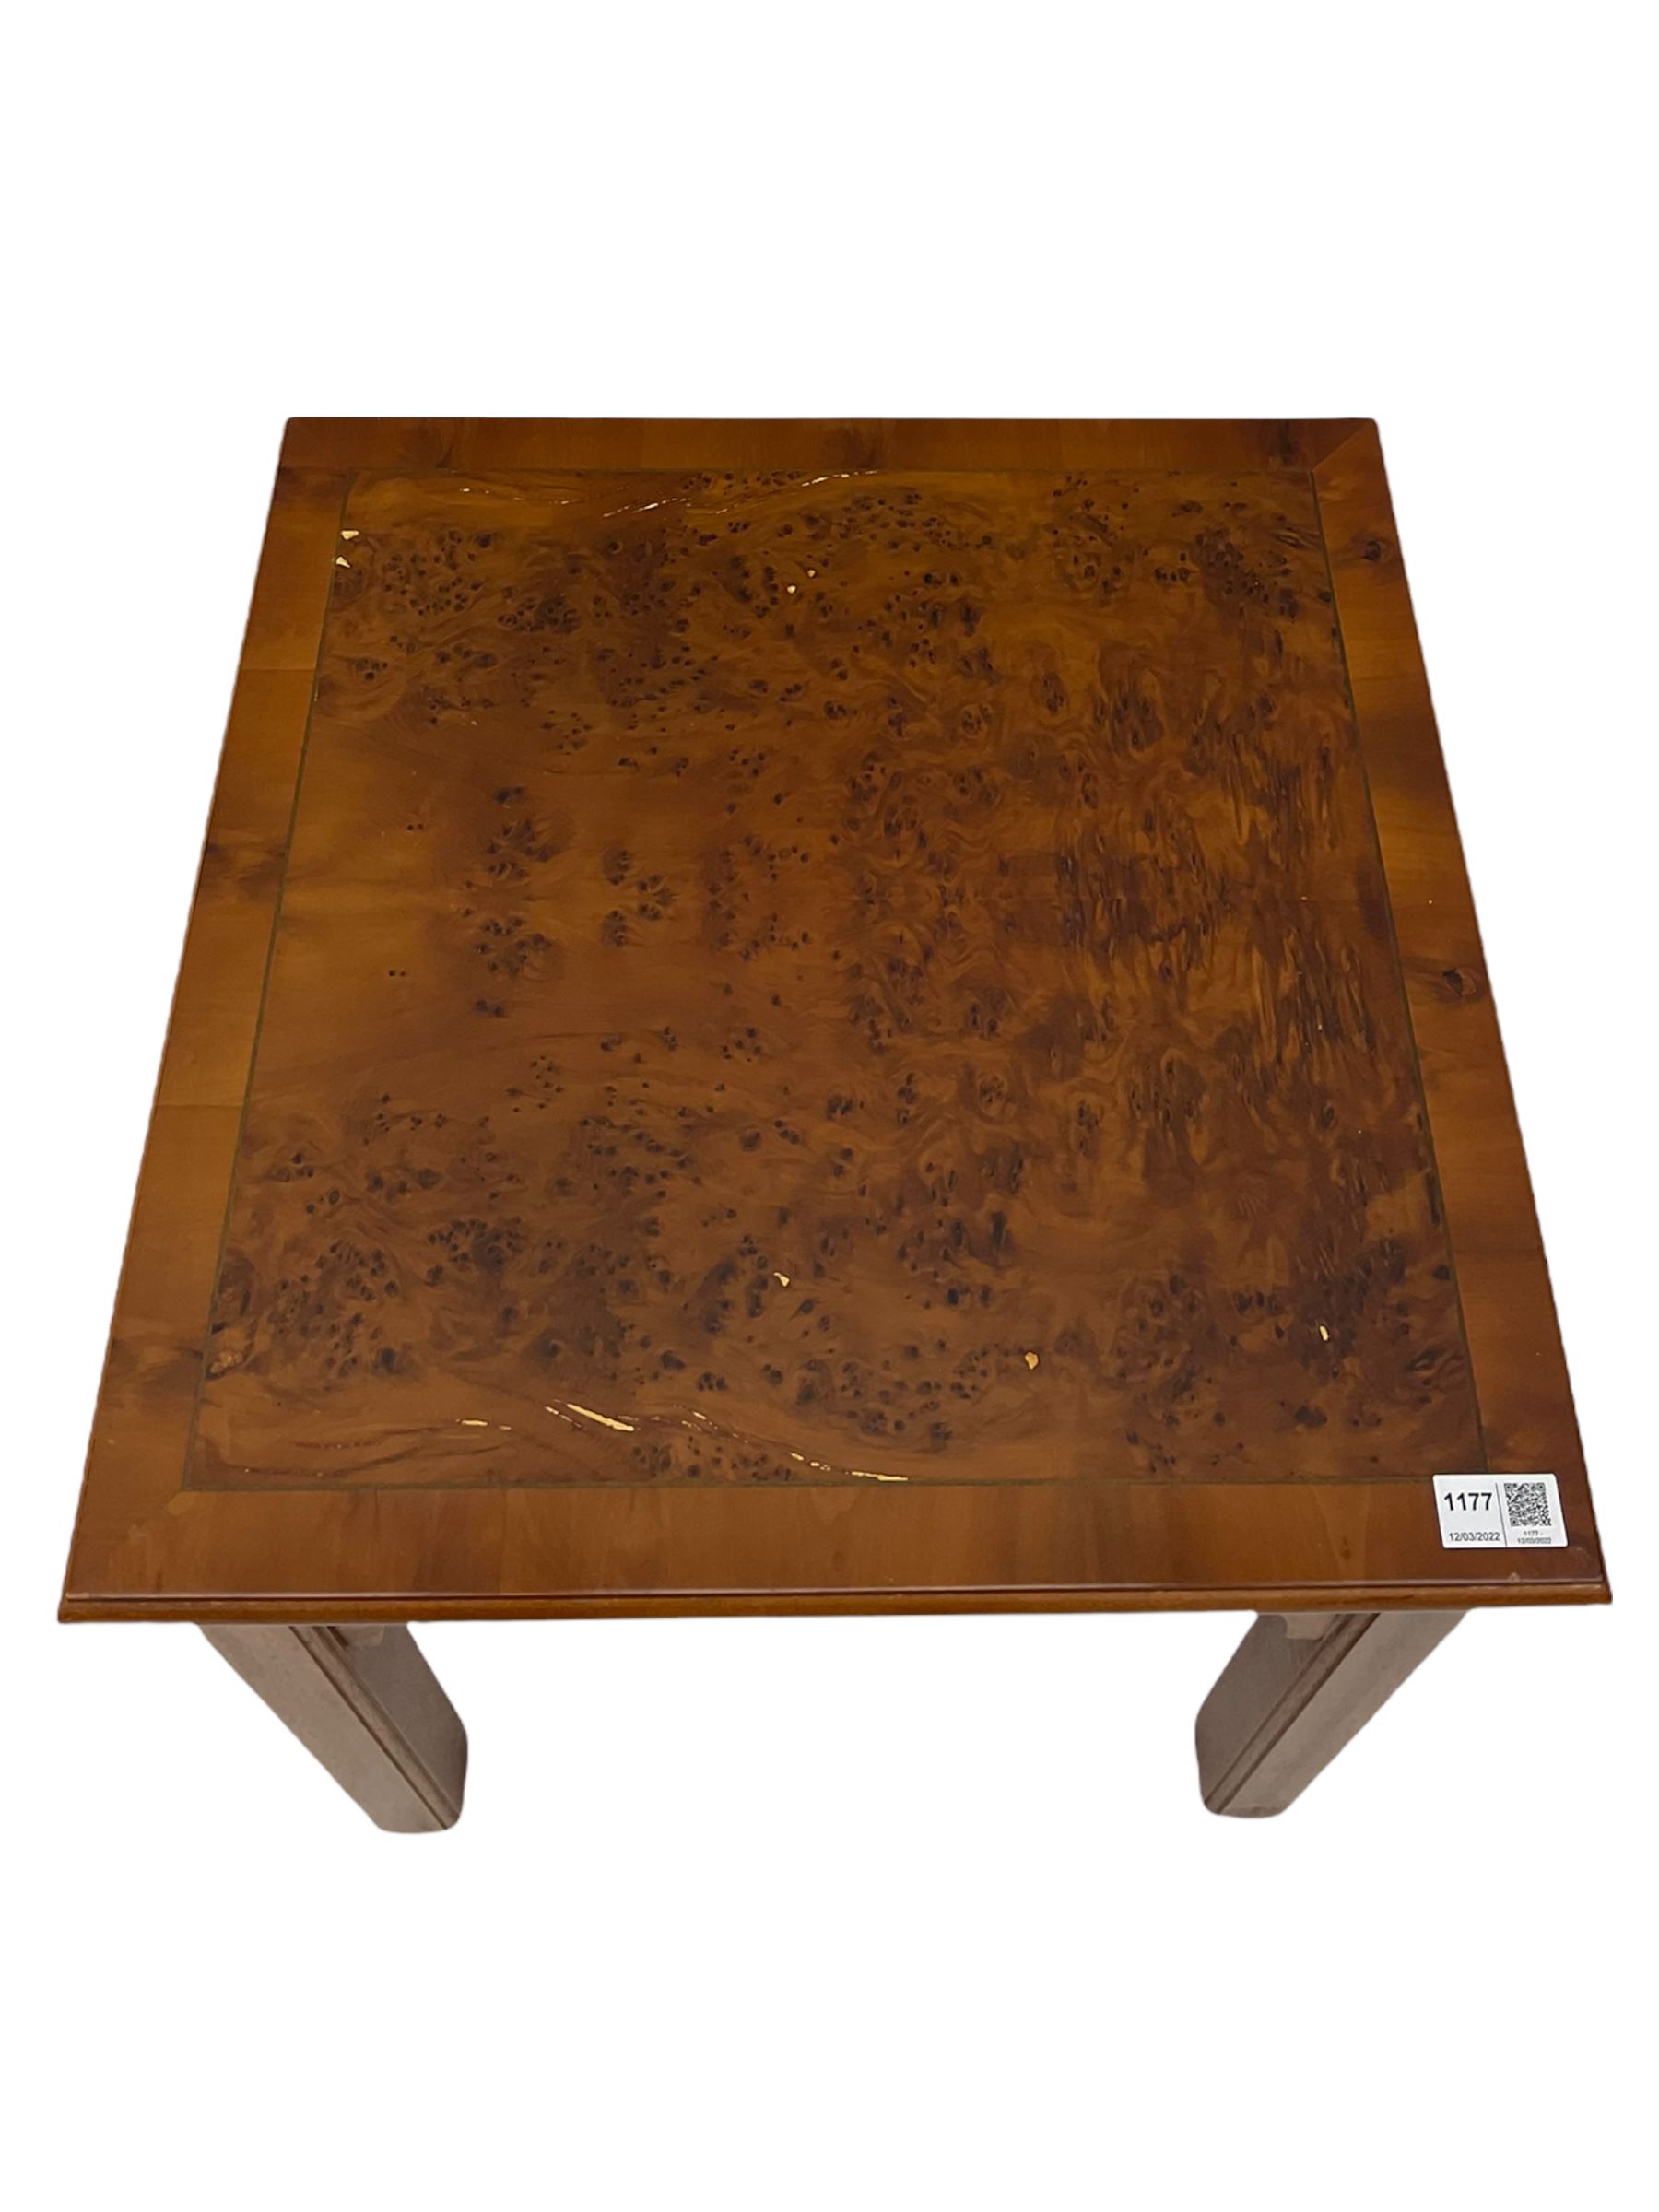 Yew wood square lamp table - Image 5 of 6